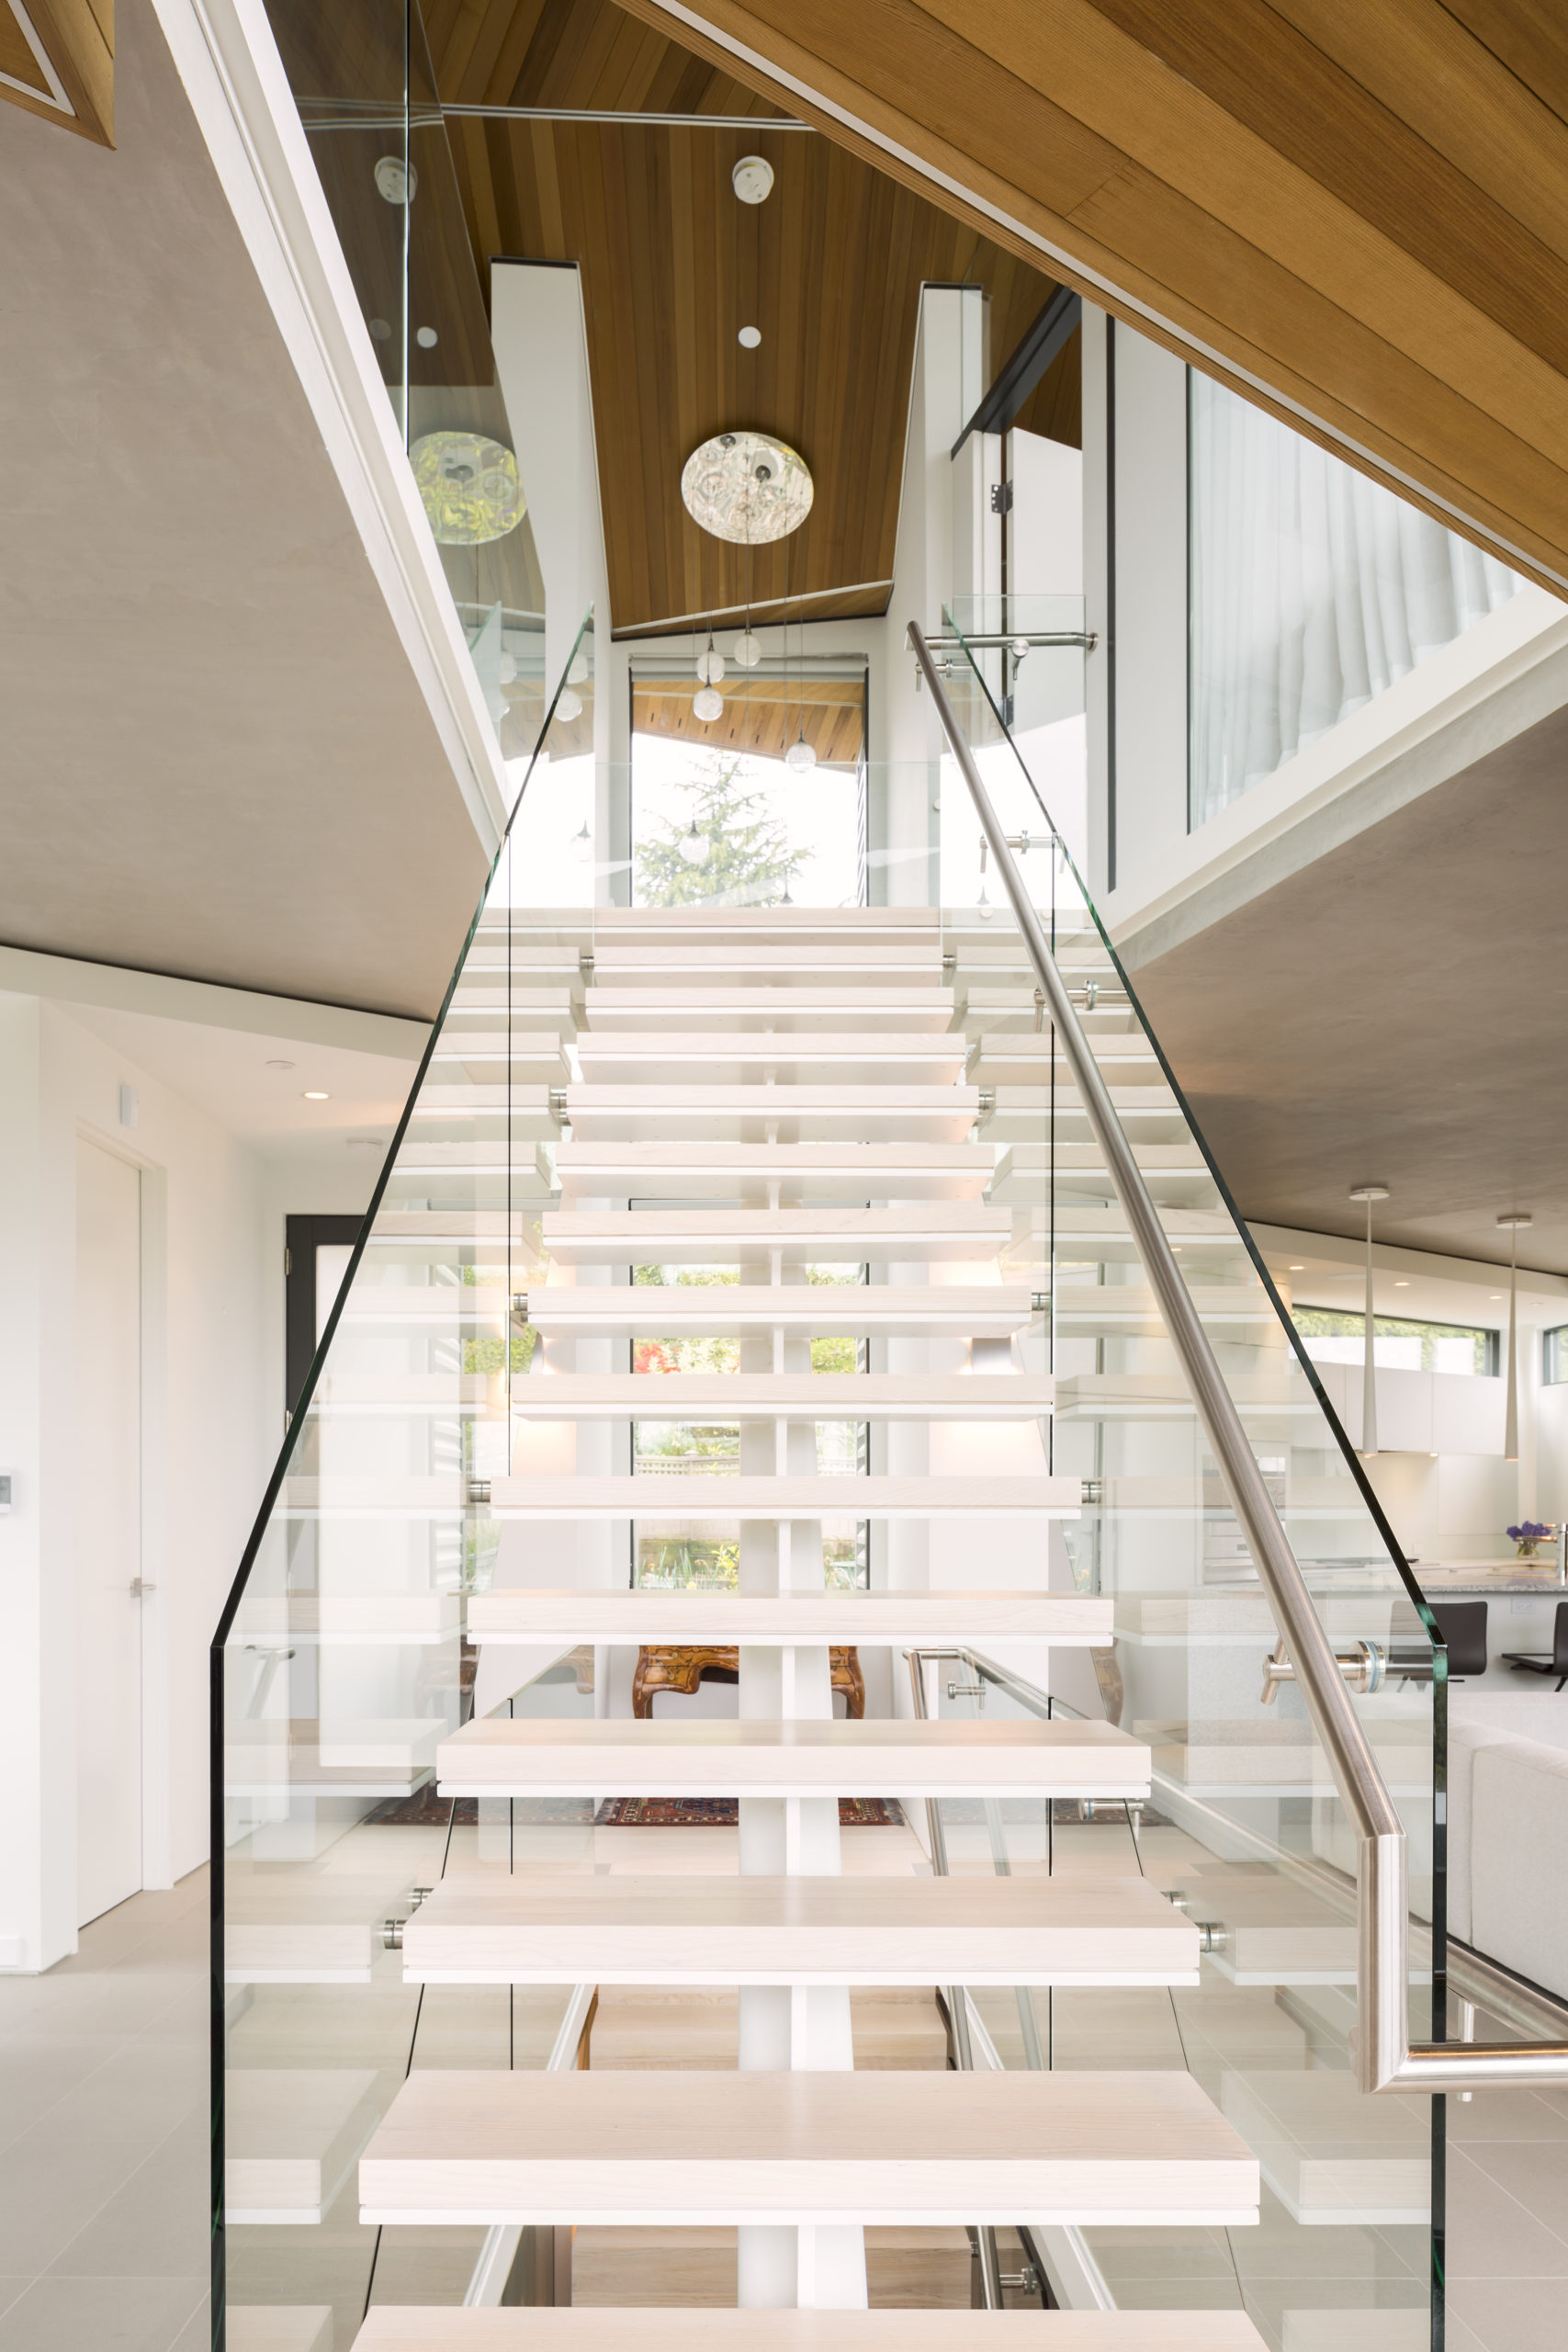 Glass-sided stairs with a modern design at a custom home in Spanish Banks.